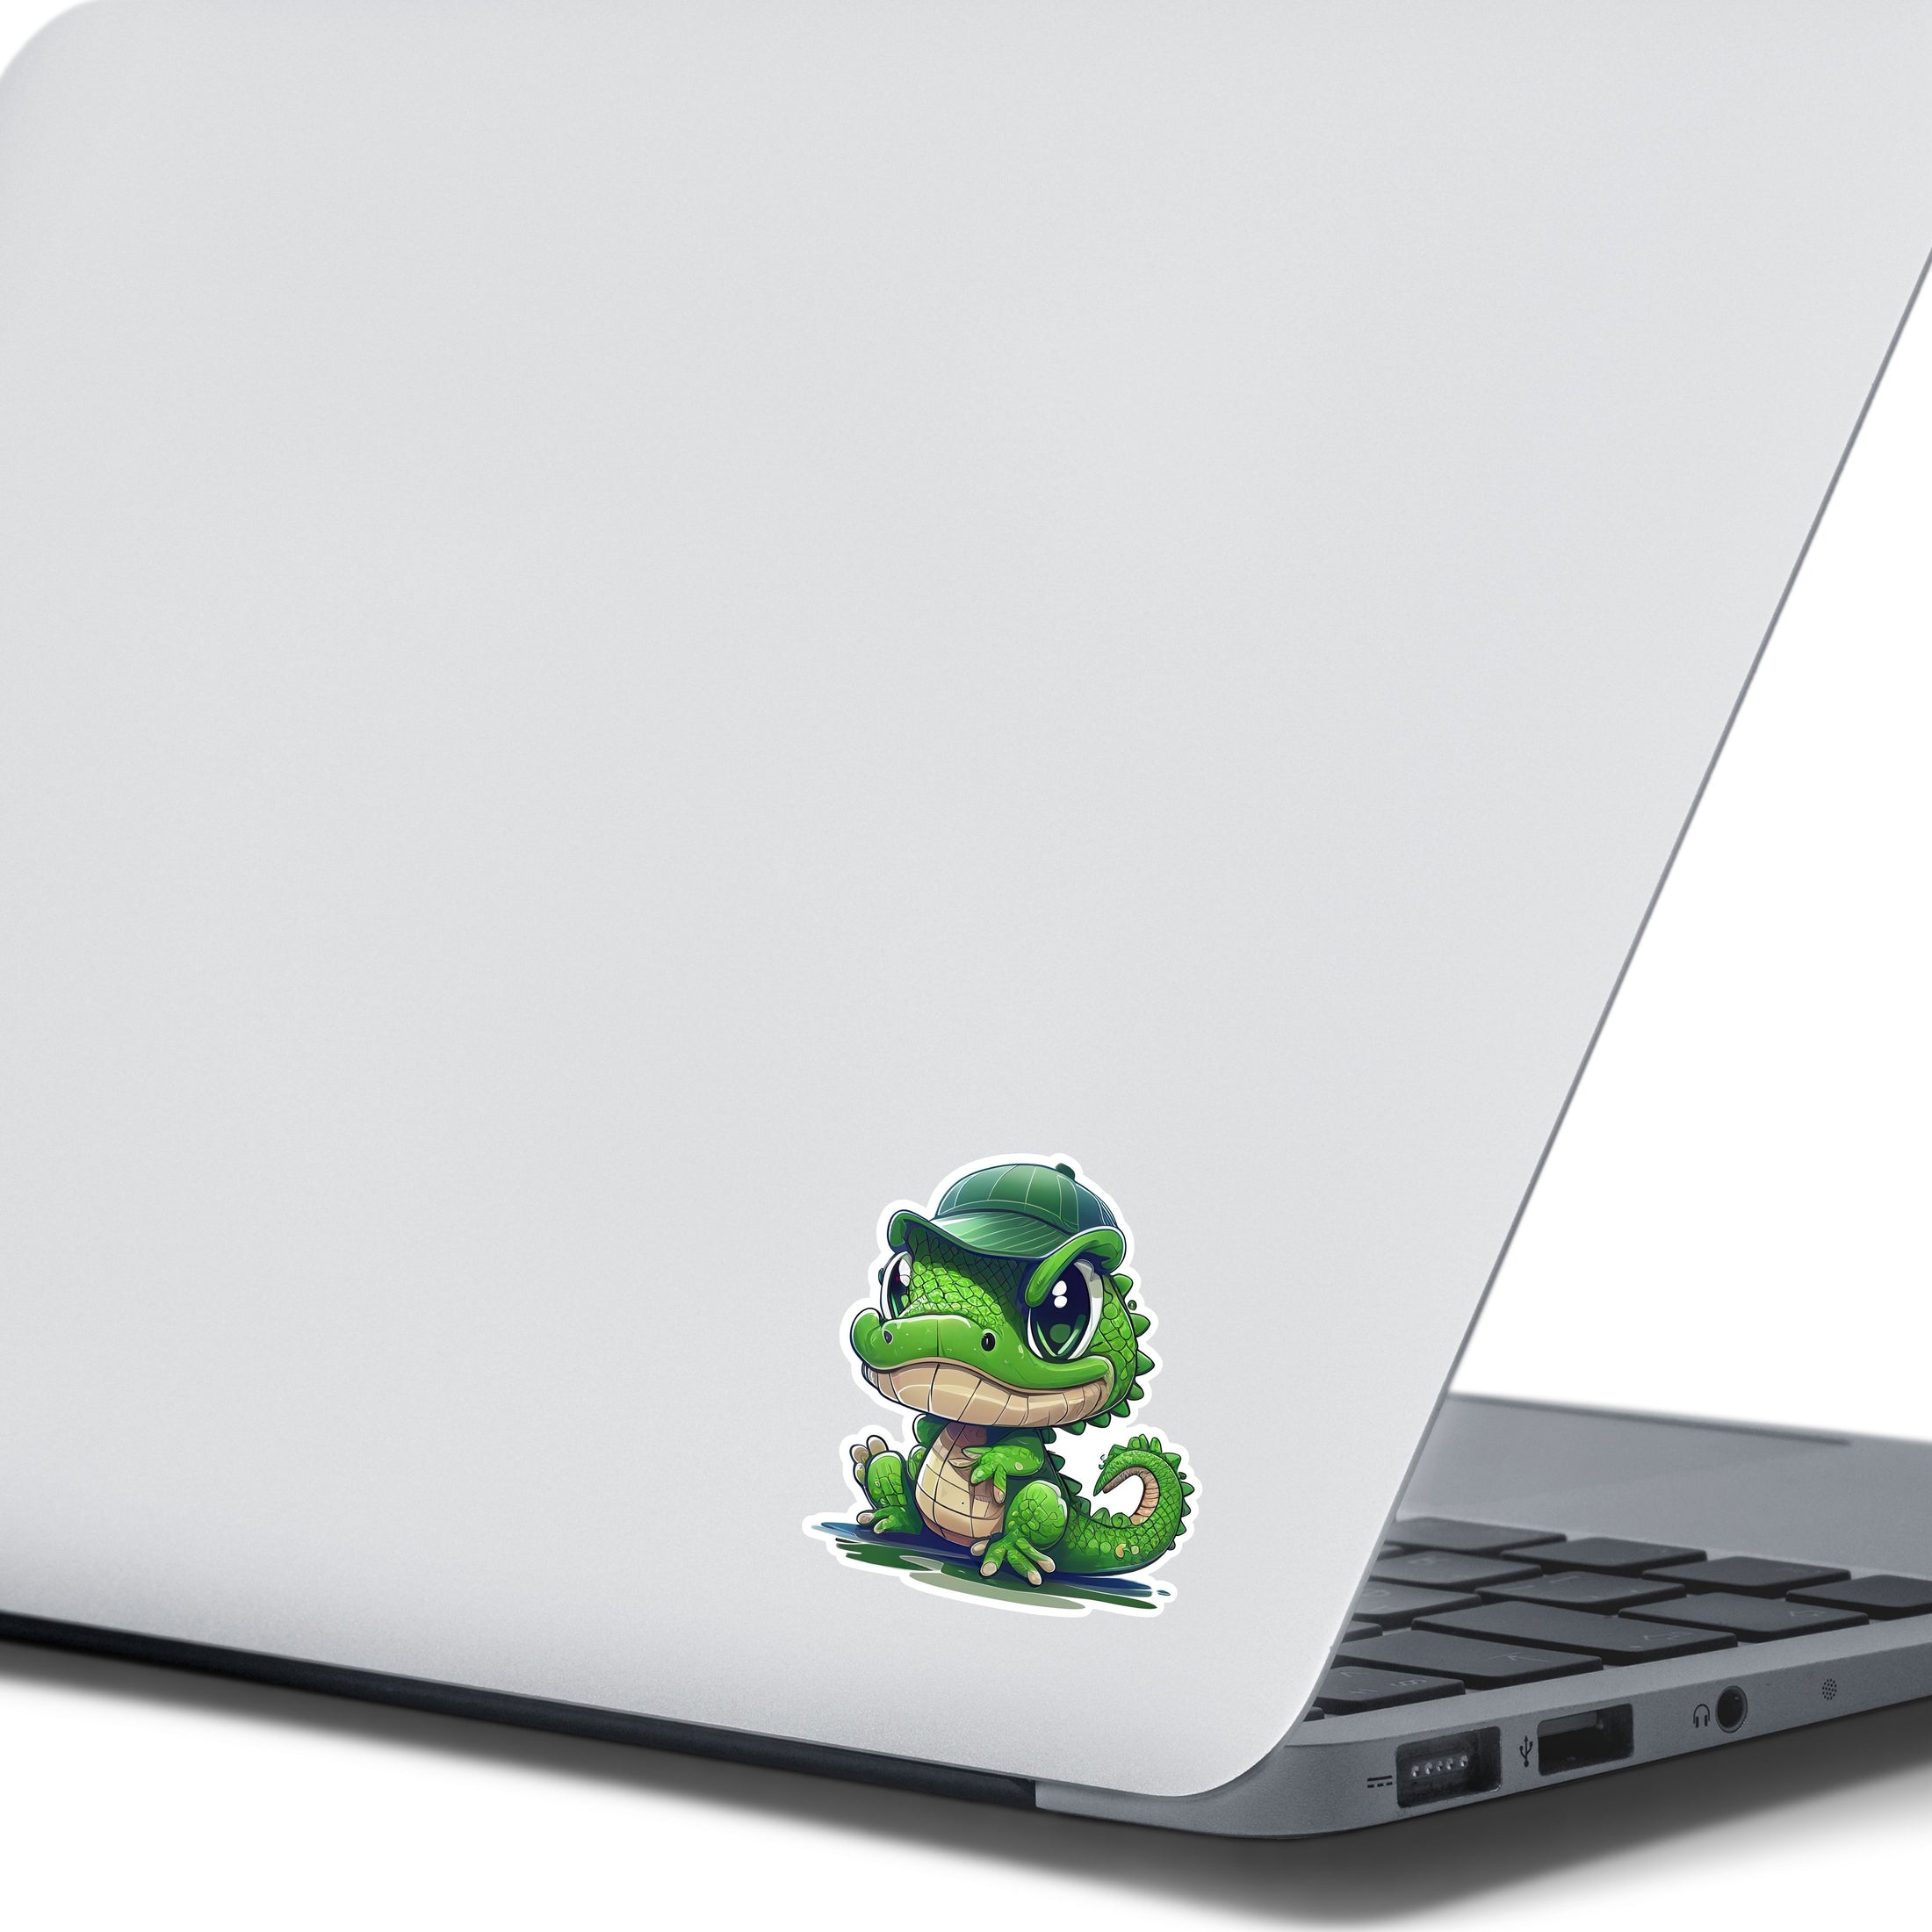 This image shows the crocodile wearing hat sticker on the back of an open laptop.